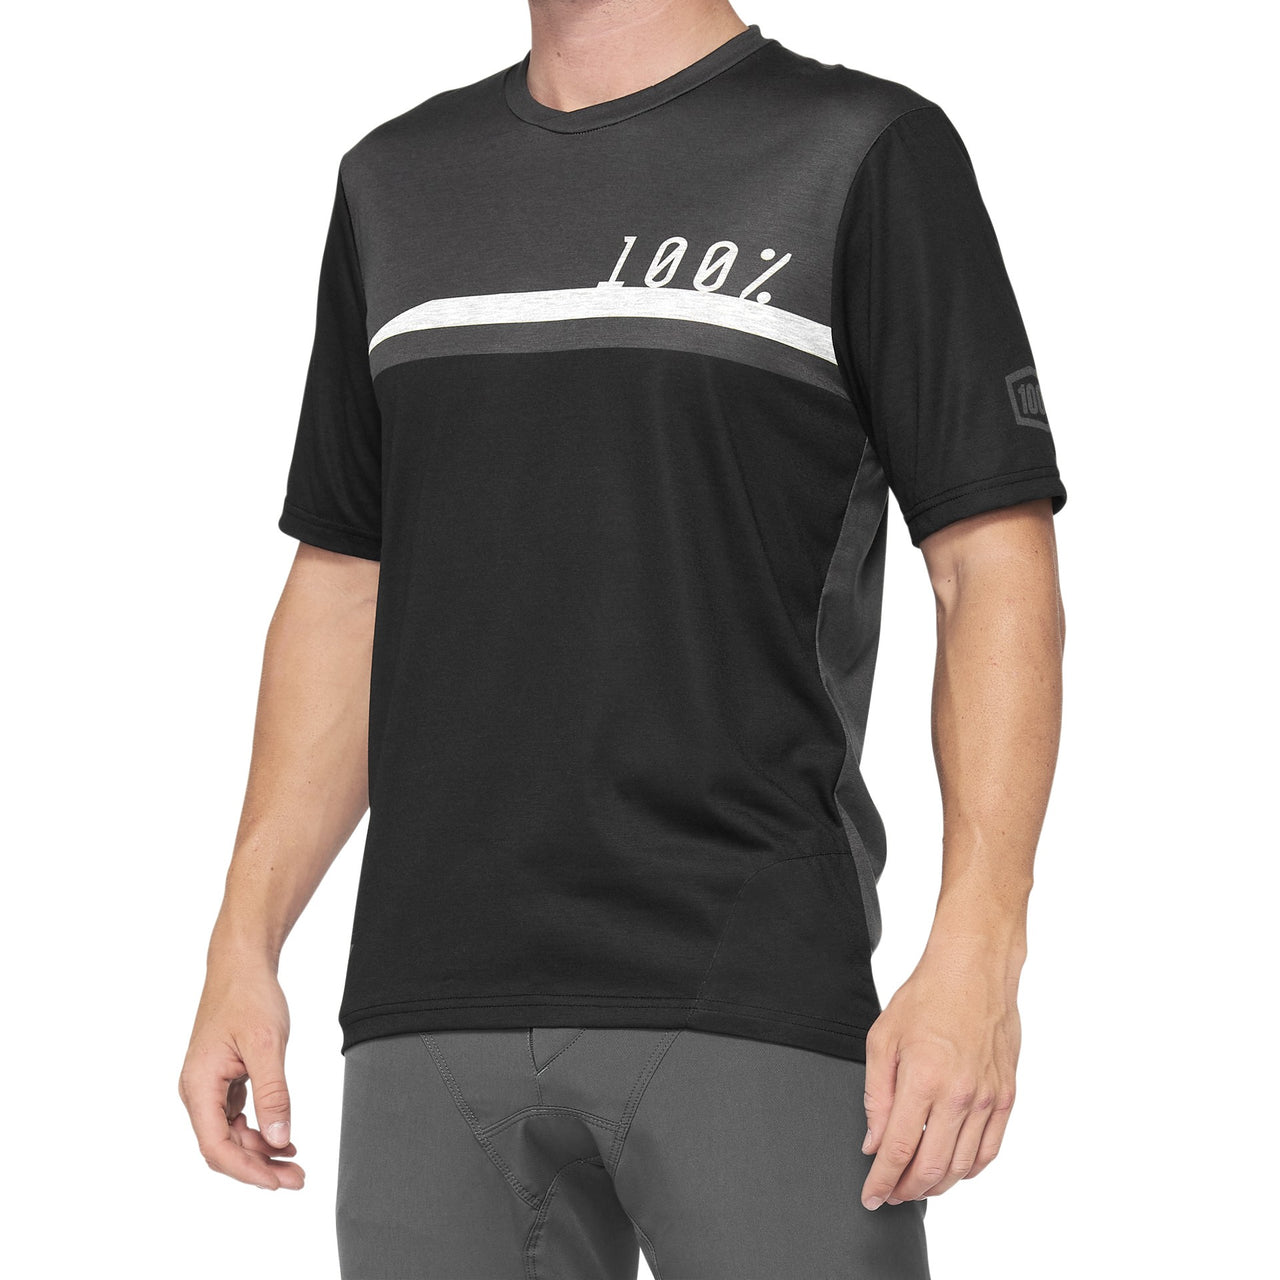 100% Airmatic Jersey Short Sleeve Black/charcoal